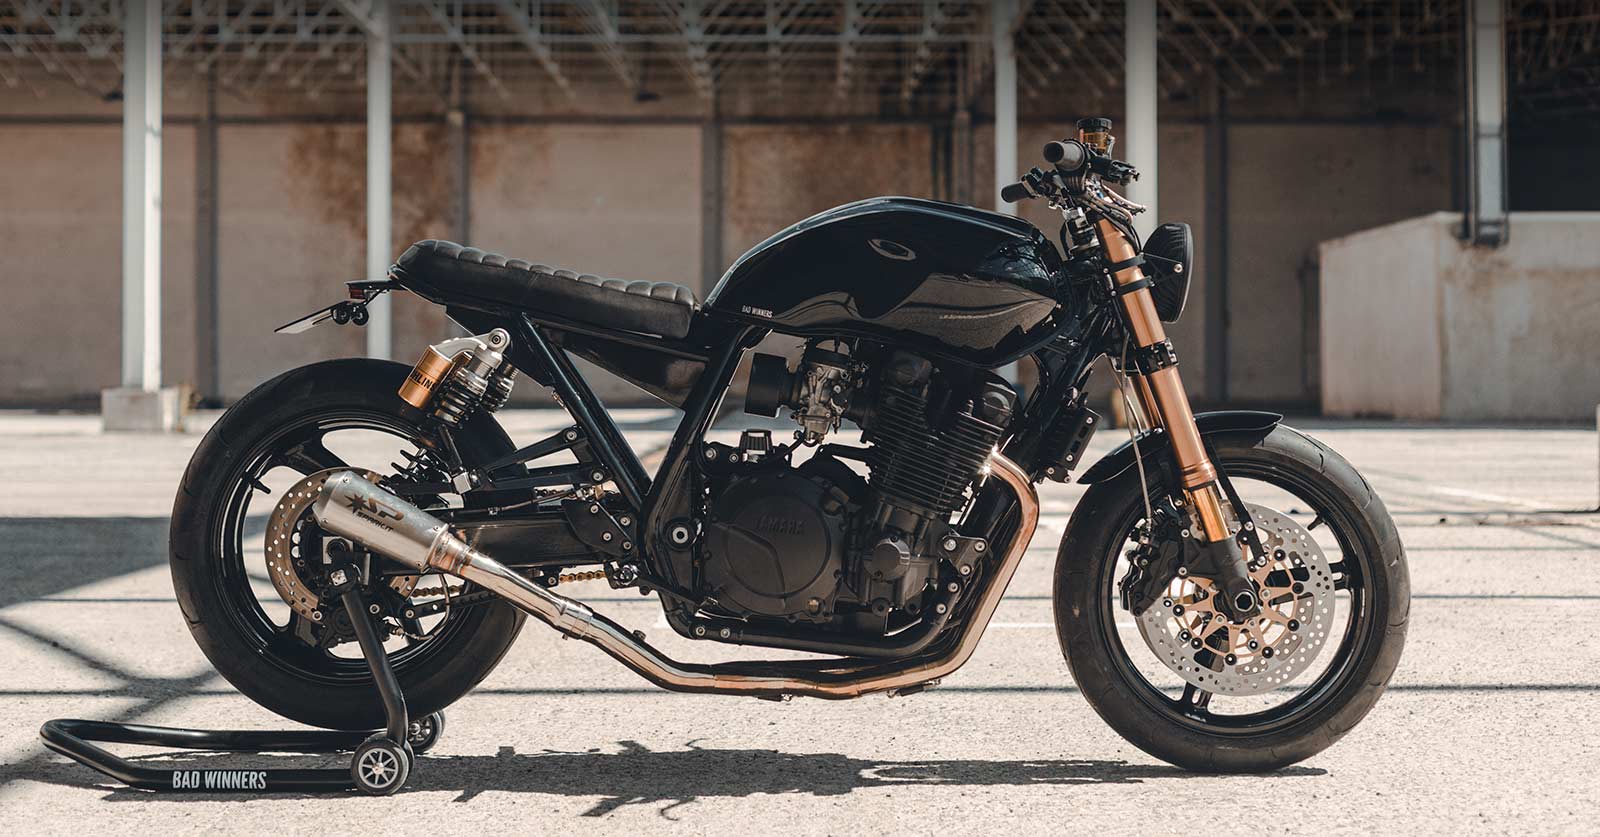 Muscle Retro A Yamaha Xjr1300 From Bad Winners Bike Exif